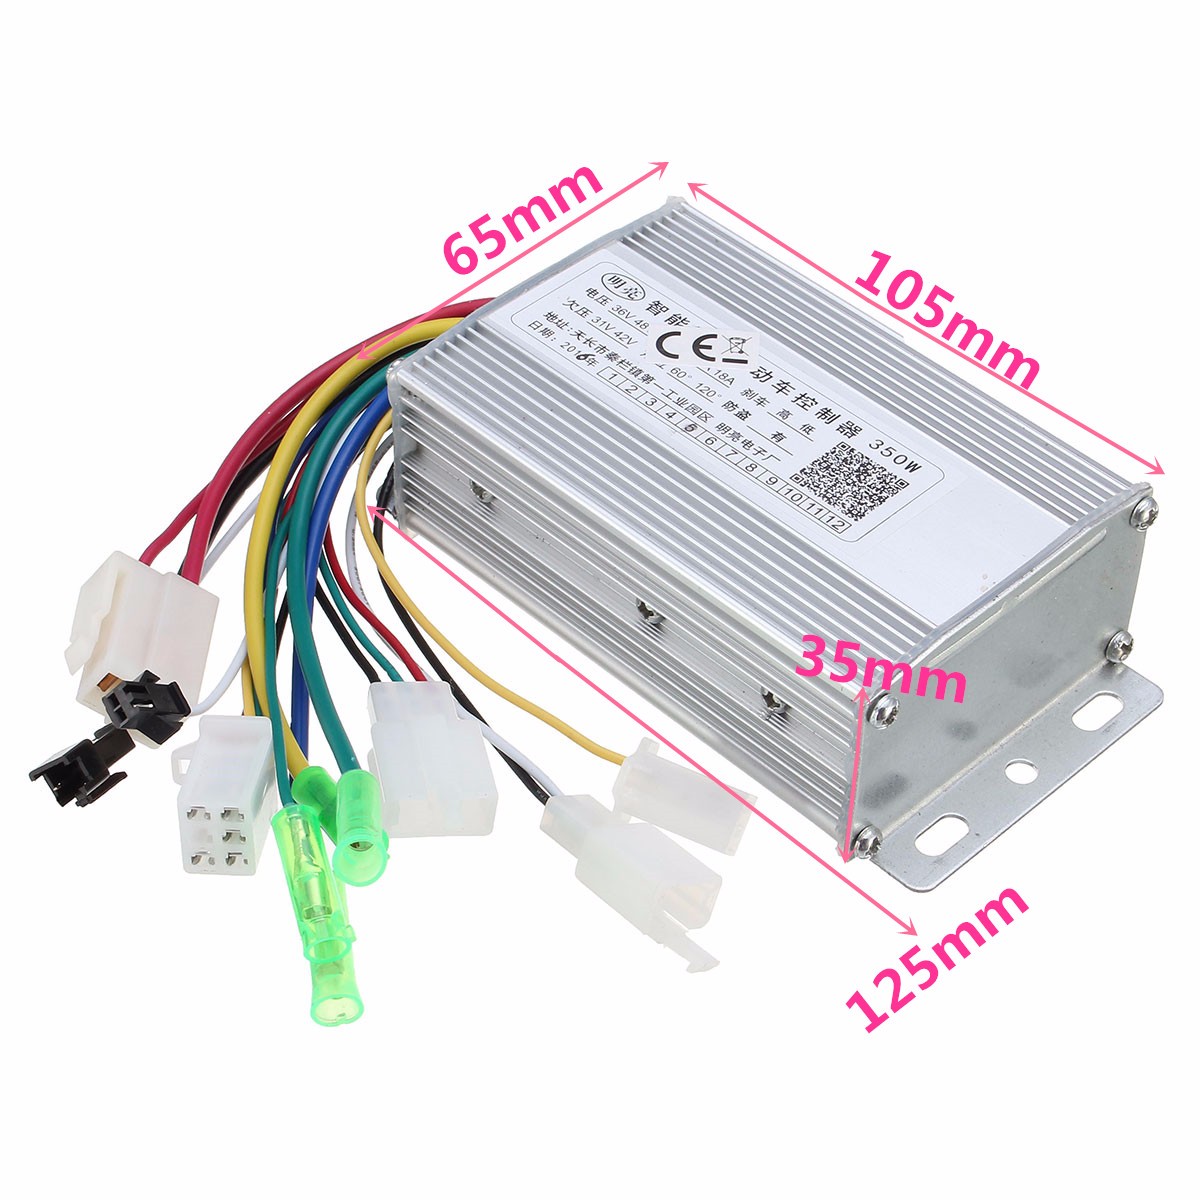 350W-36V48V-Brushless-Controller-For-Scooter-E--bike-WithWithout-Hall-Sensor-1066609